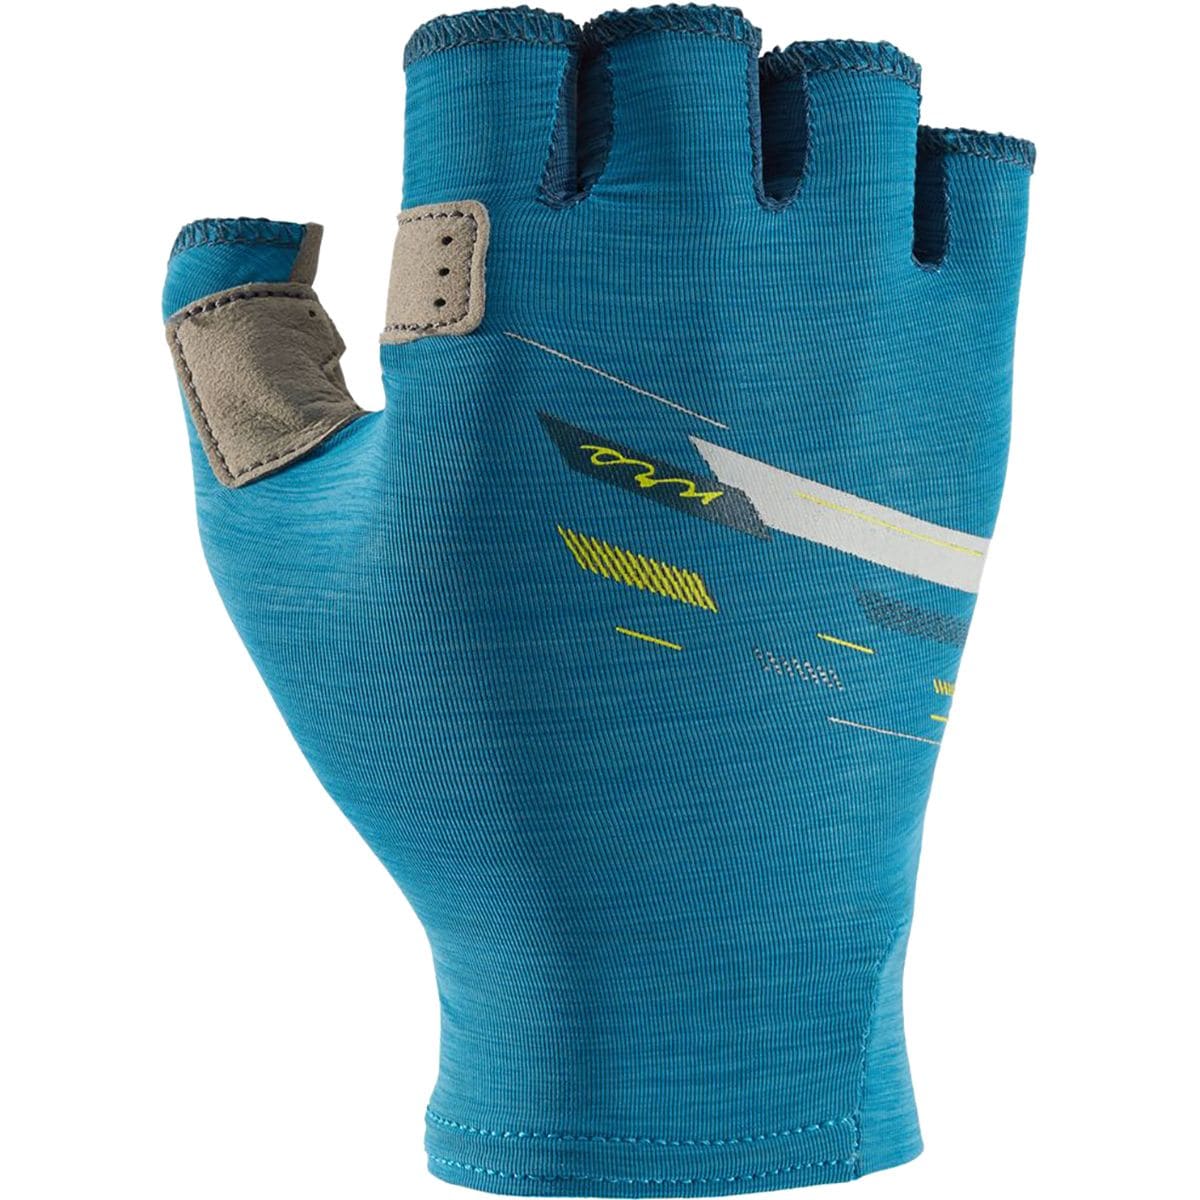 NRS Boater's Glove - Women's